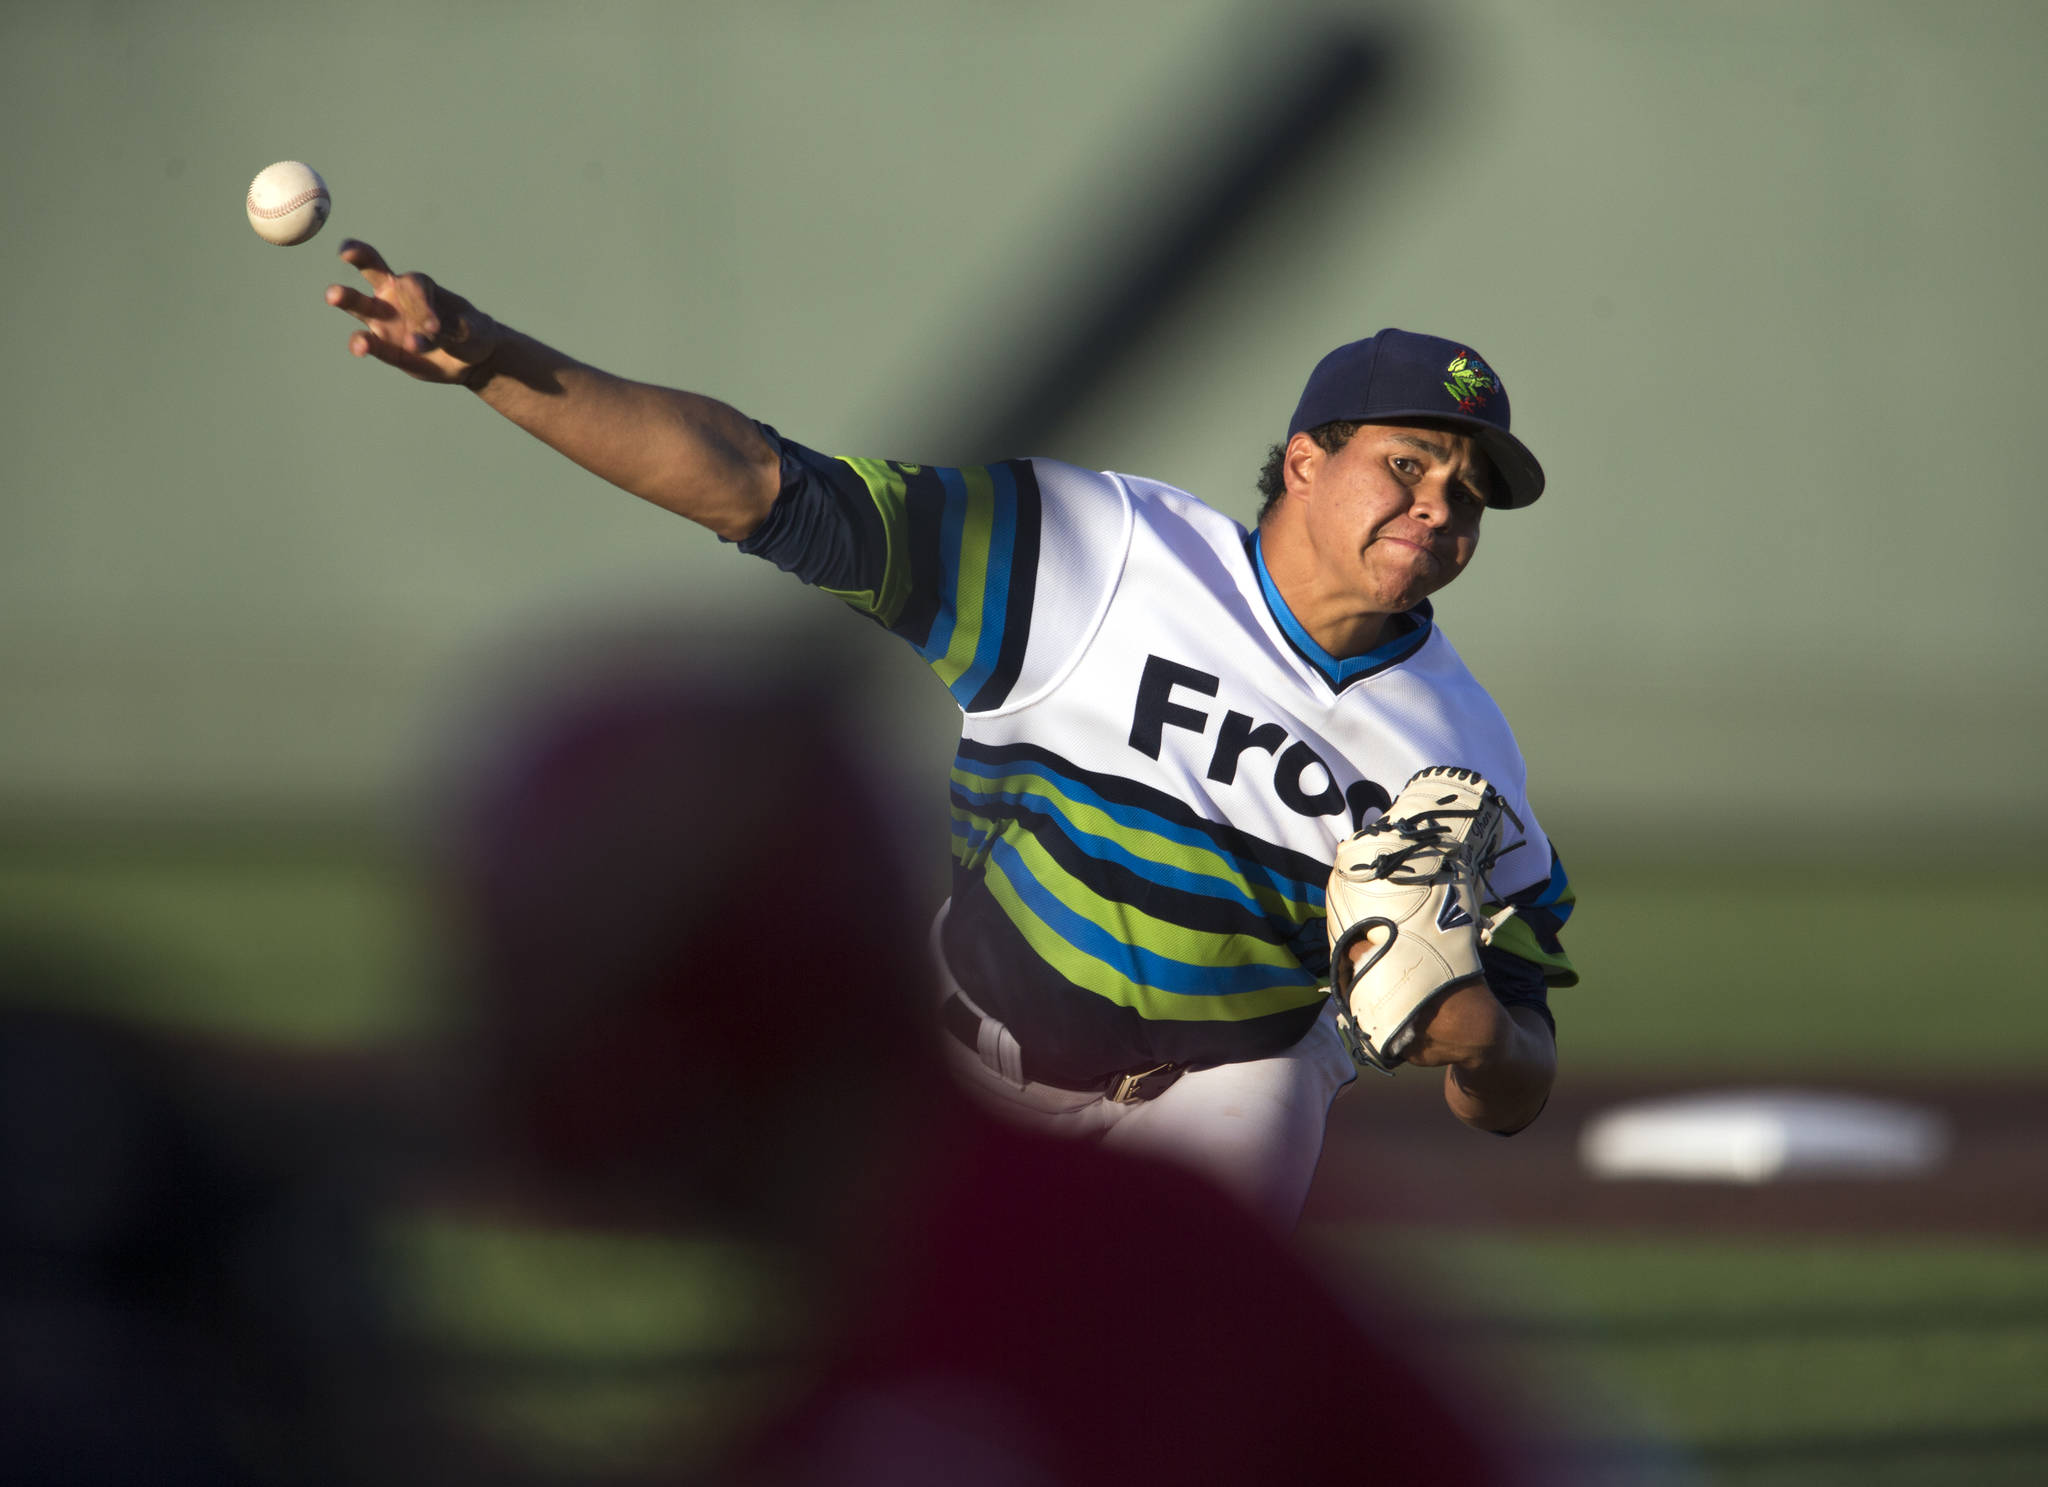 AquaSox pitcher Juan Then’s return to action was one of the bright spots in Everett’s series against Vancouver this past week. (Andy Bronson / The Herald)